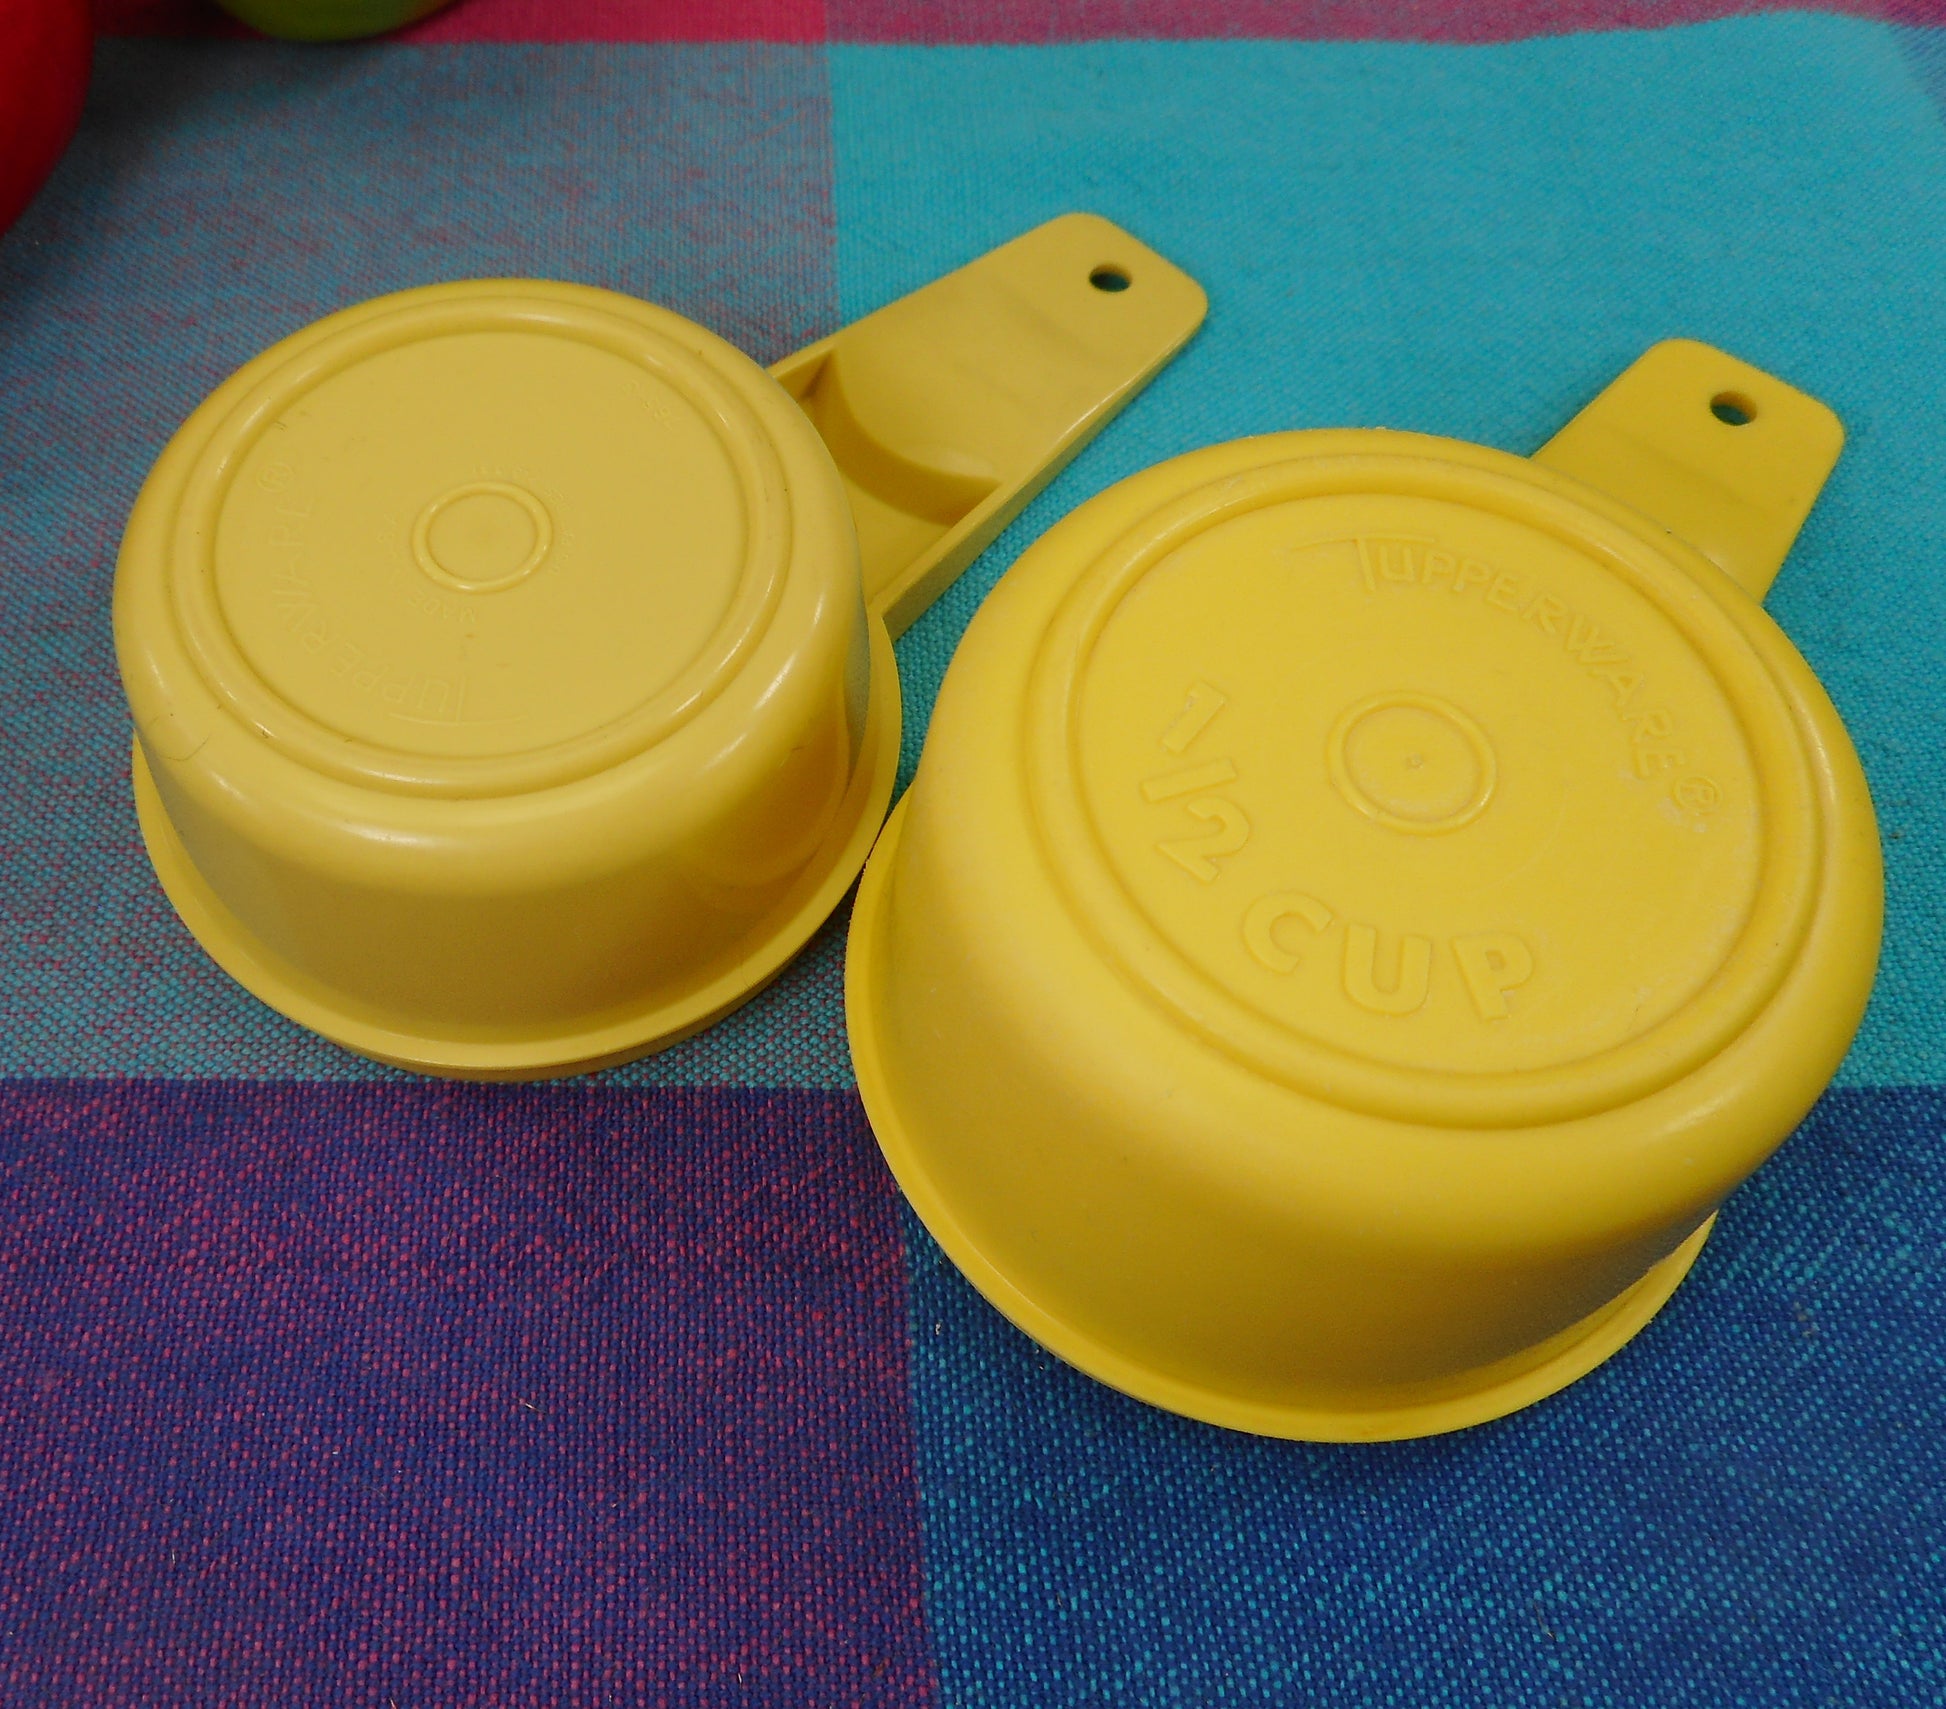 Tupperware Harvest Gold Measuring Cup - 1/3 Cup Replacement Vintage